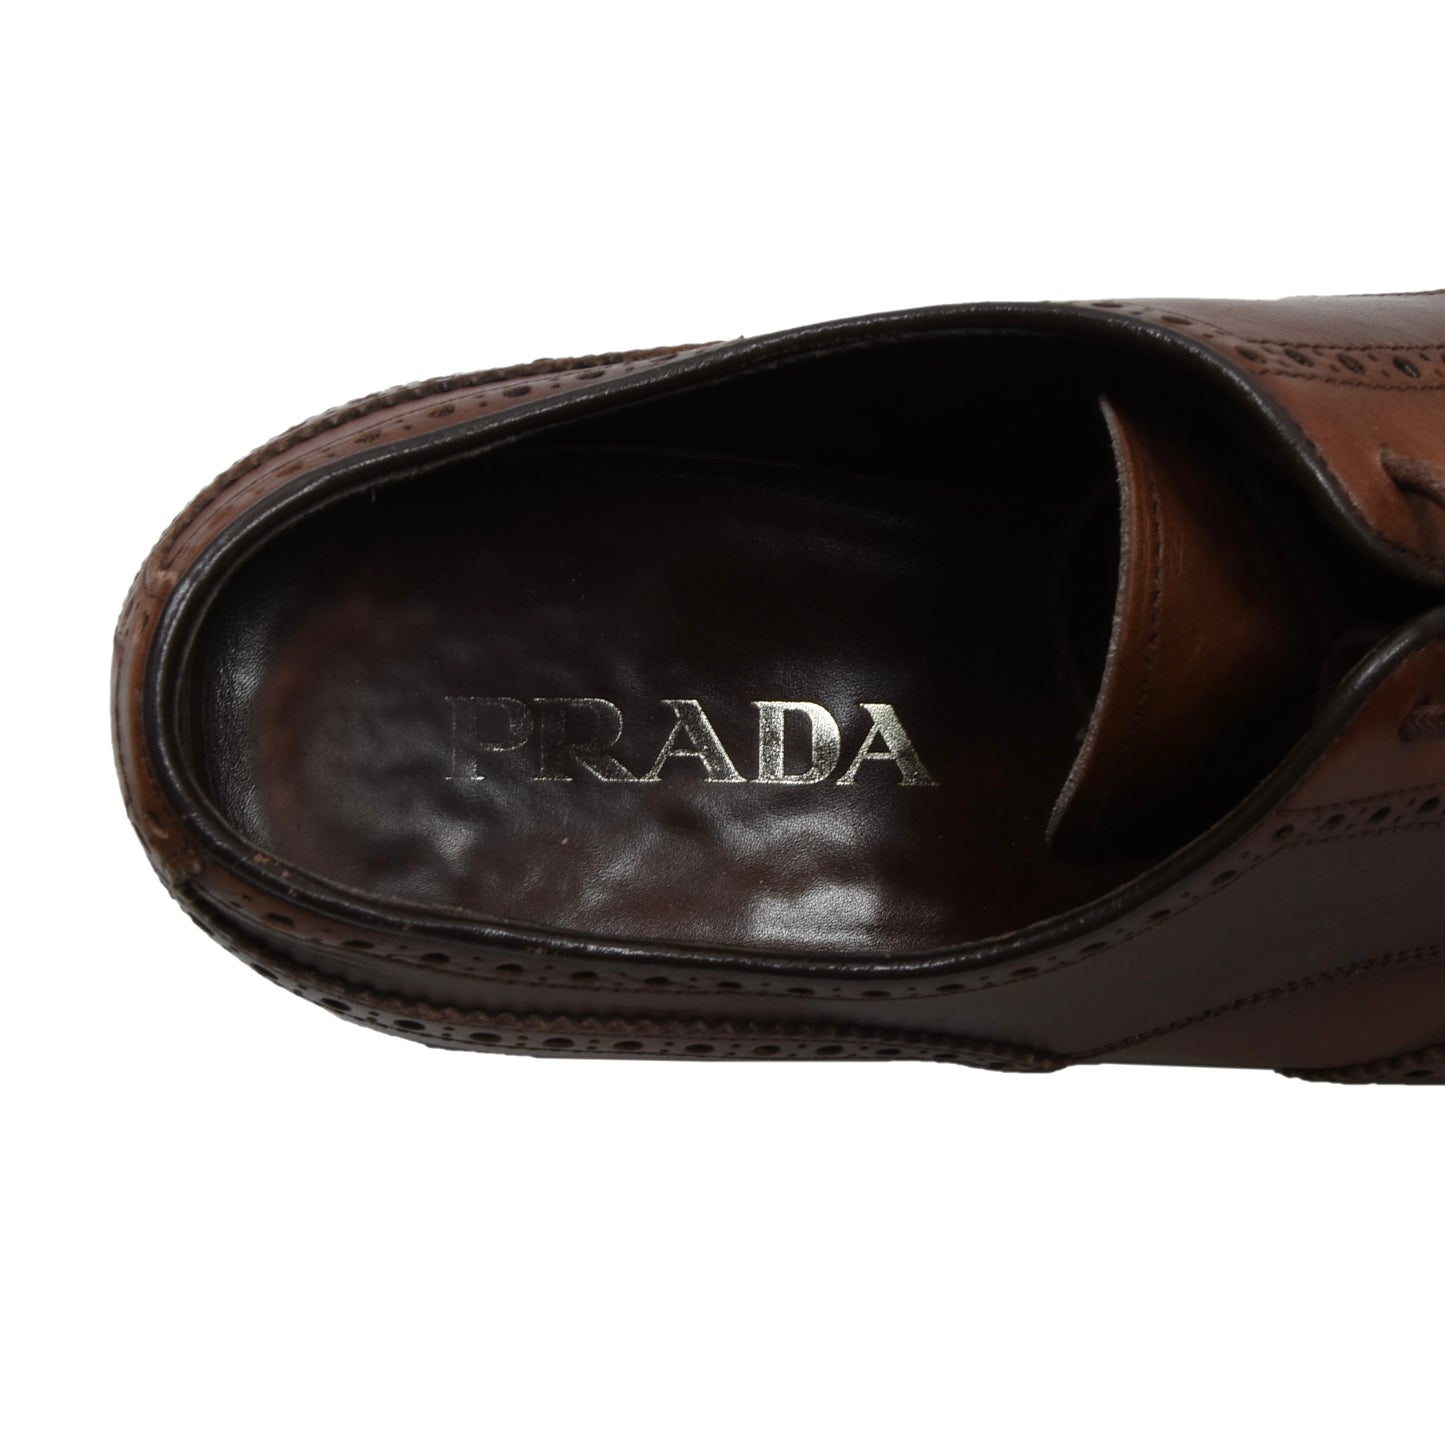 Prada Leather Shoes Size 8 - Brown